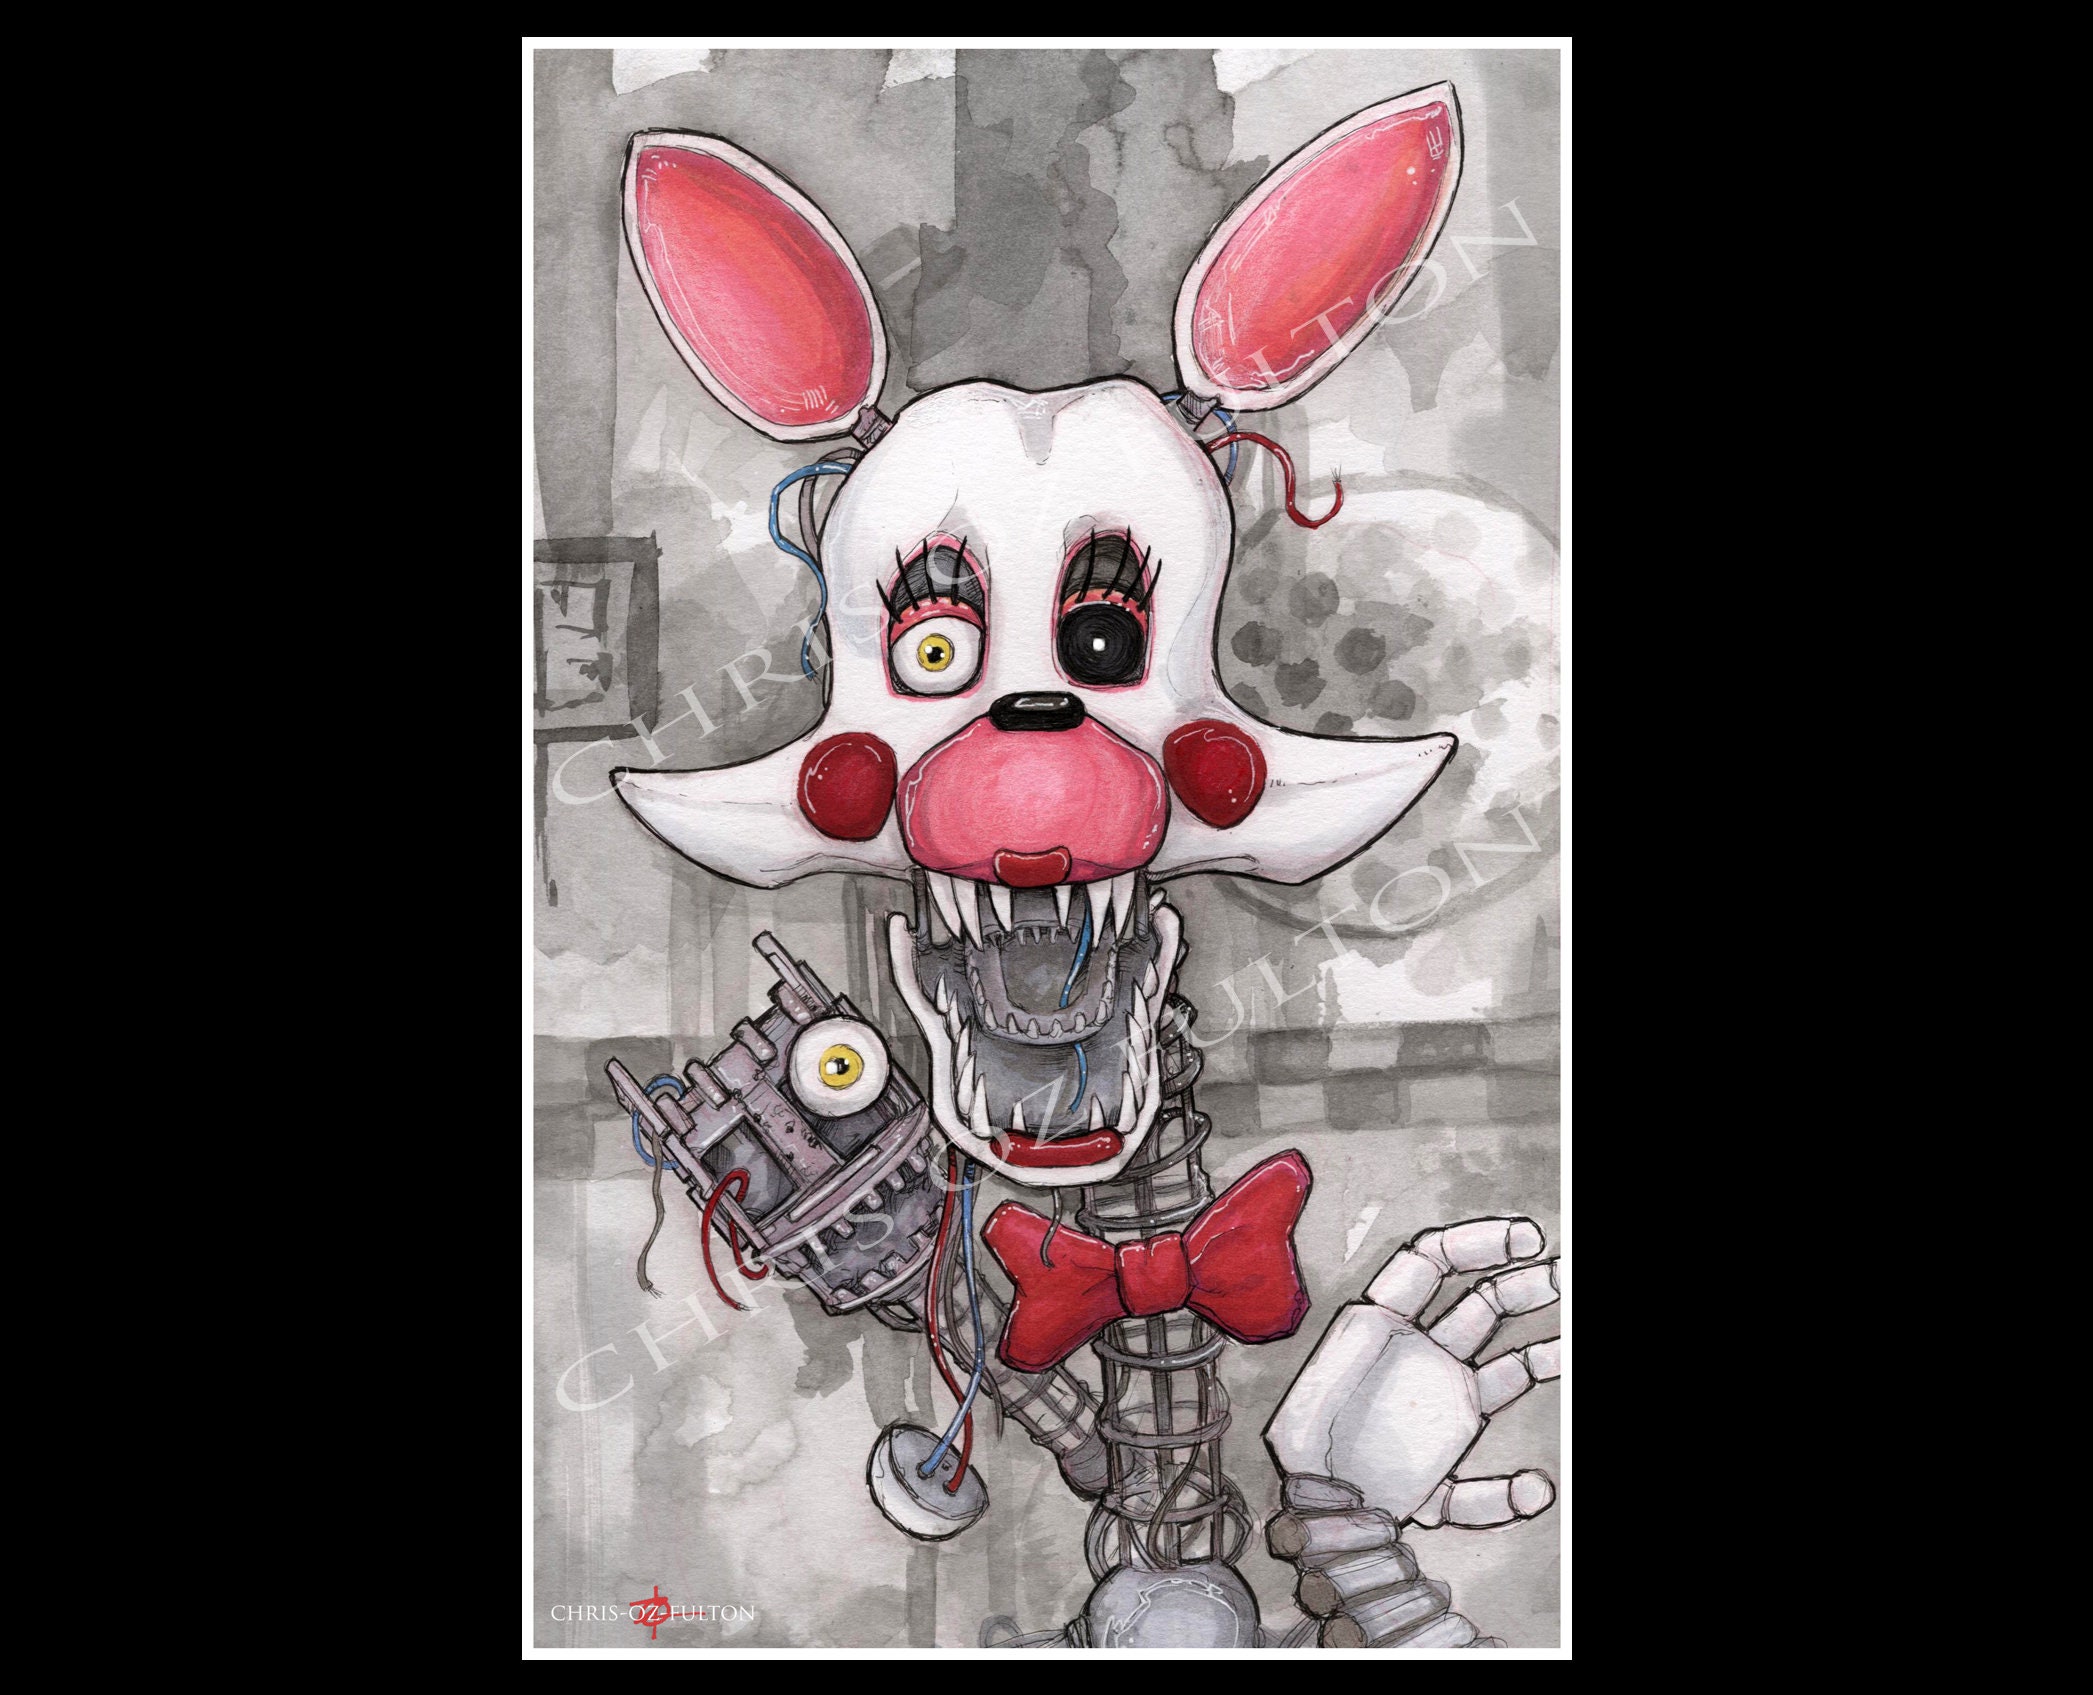 Margarine Luka is Mangle from Five Nights at Freddy's Art Print